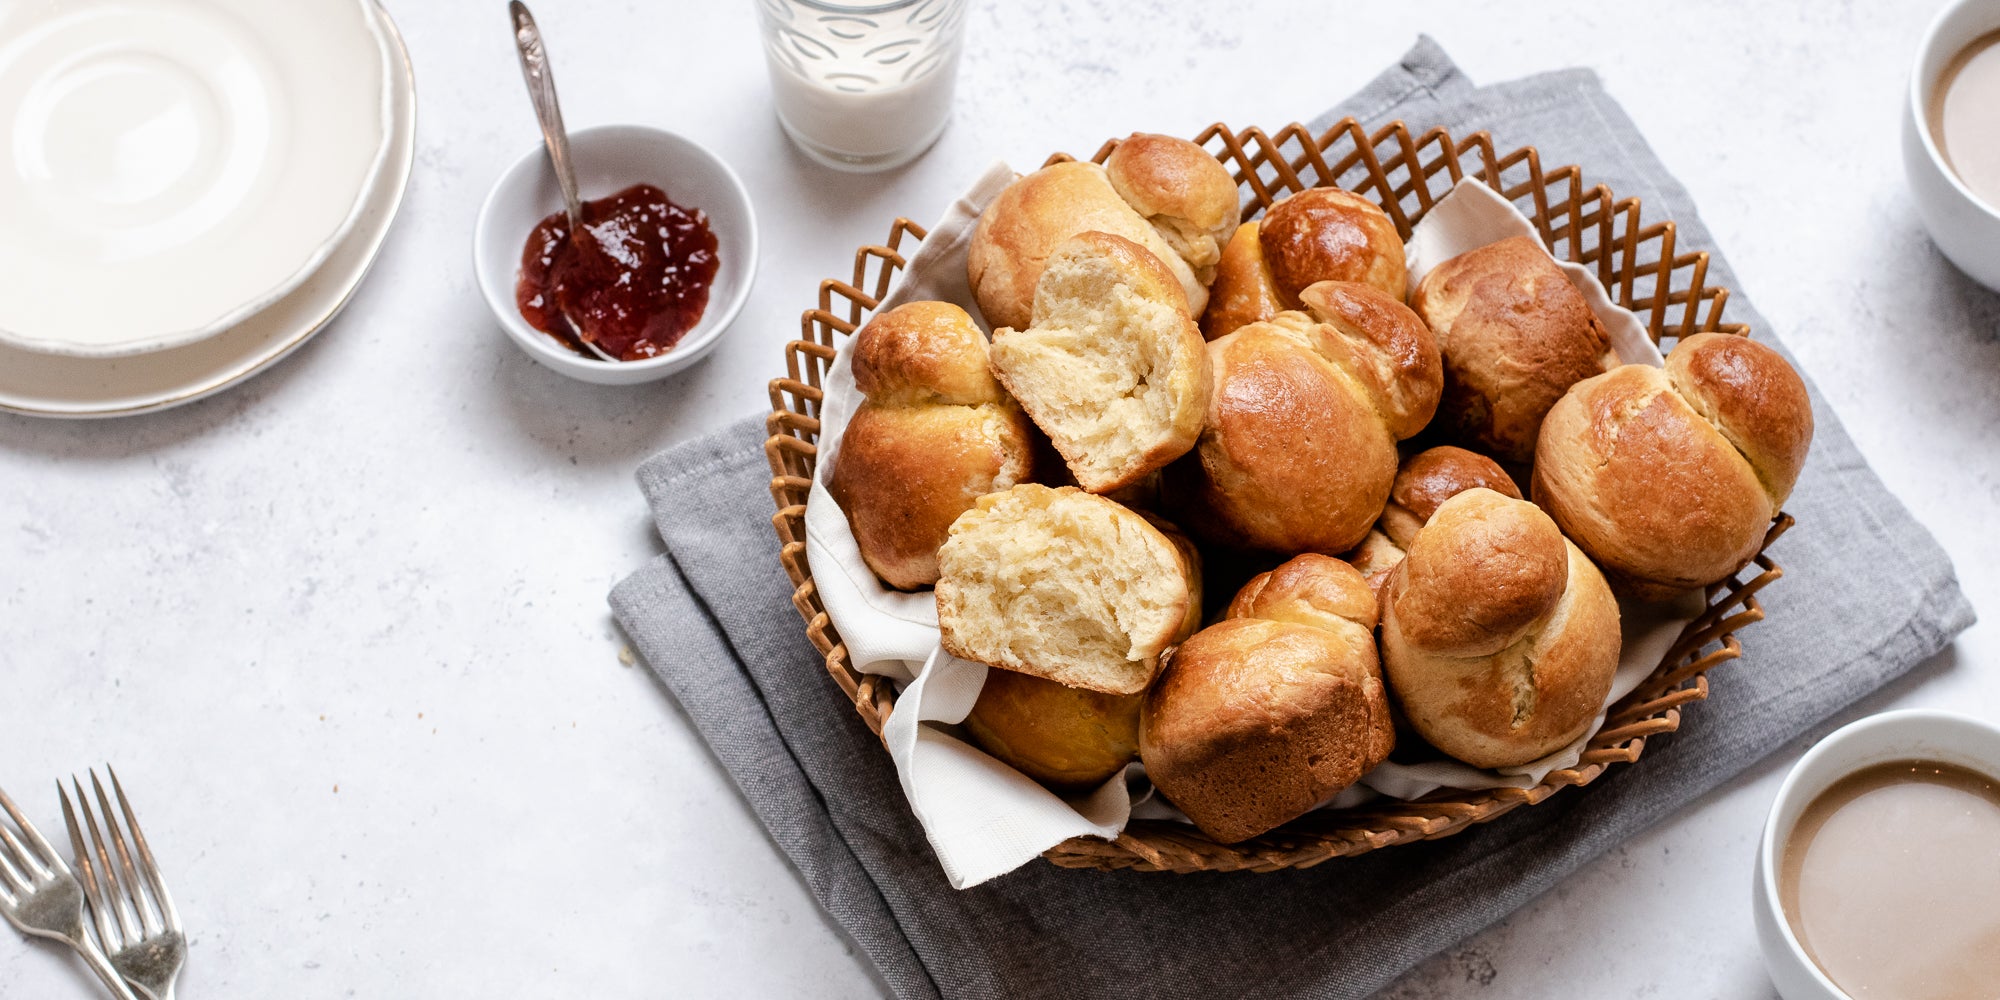 Basket of fresh Brioche, with one torn apart showing the fluffy inside. Next to a small bowl of jam with a spoon